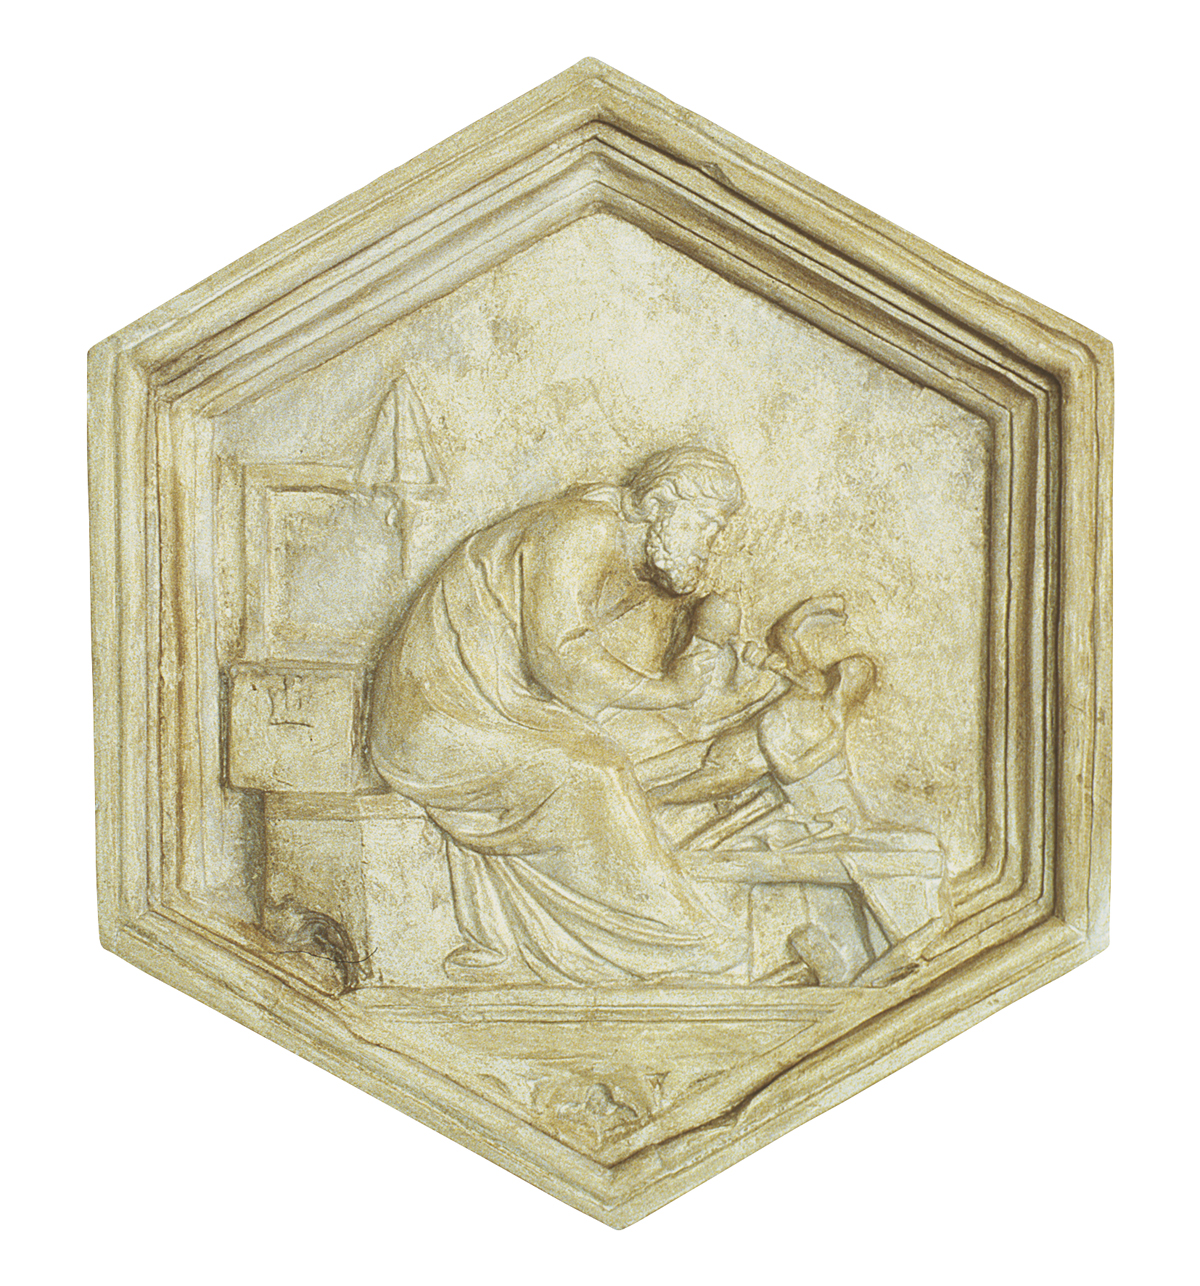 The sculptor, a carved panel from Giotto's bell tower (cast in plaster)